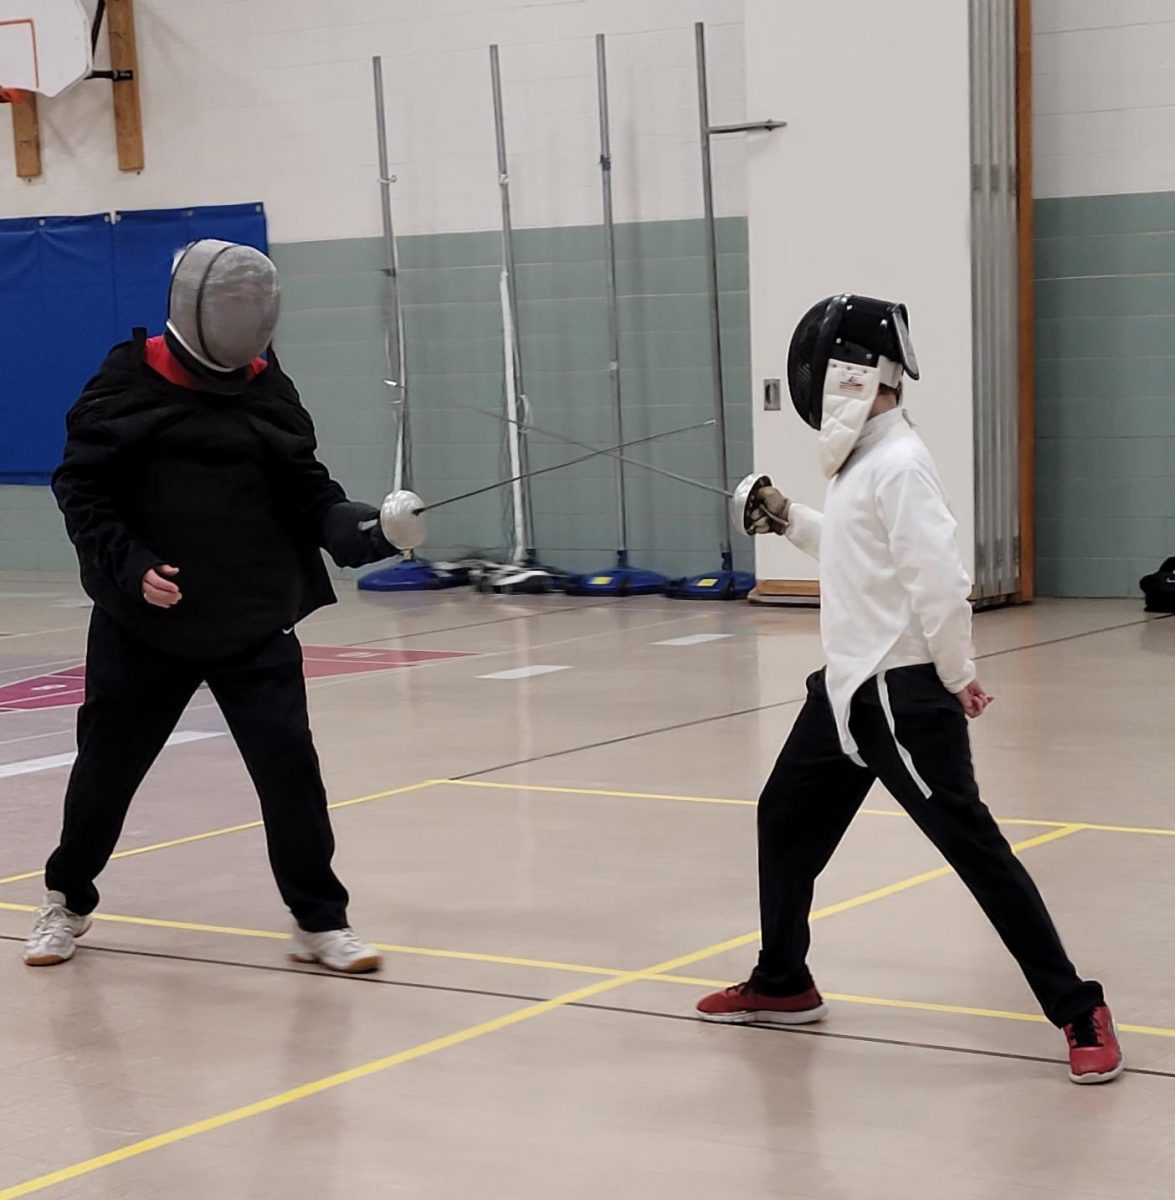 At his first fencing class, freshman Dominic Darby fences his instructor. “My instructor was teaching the basics of things like parying and movement,” Darby said.